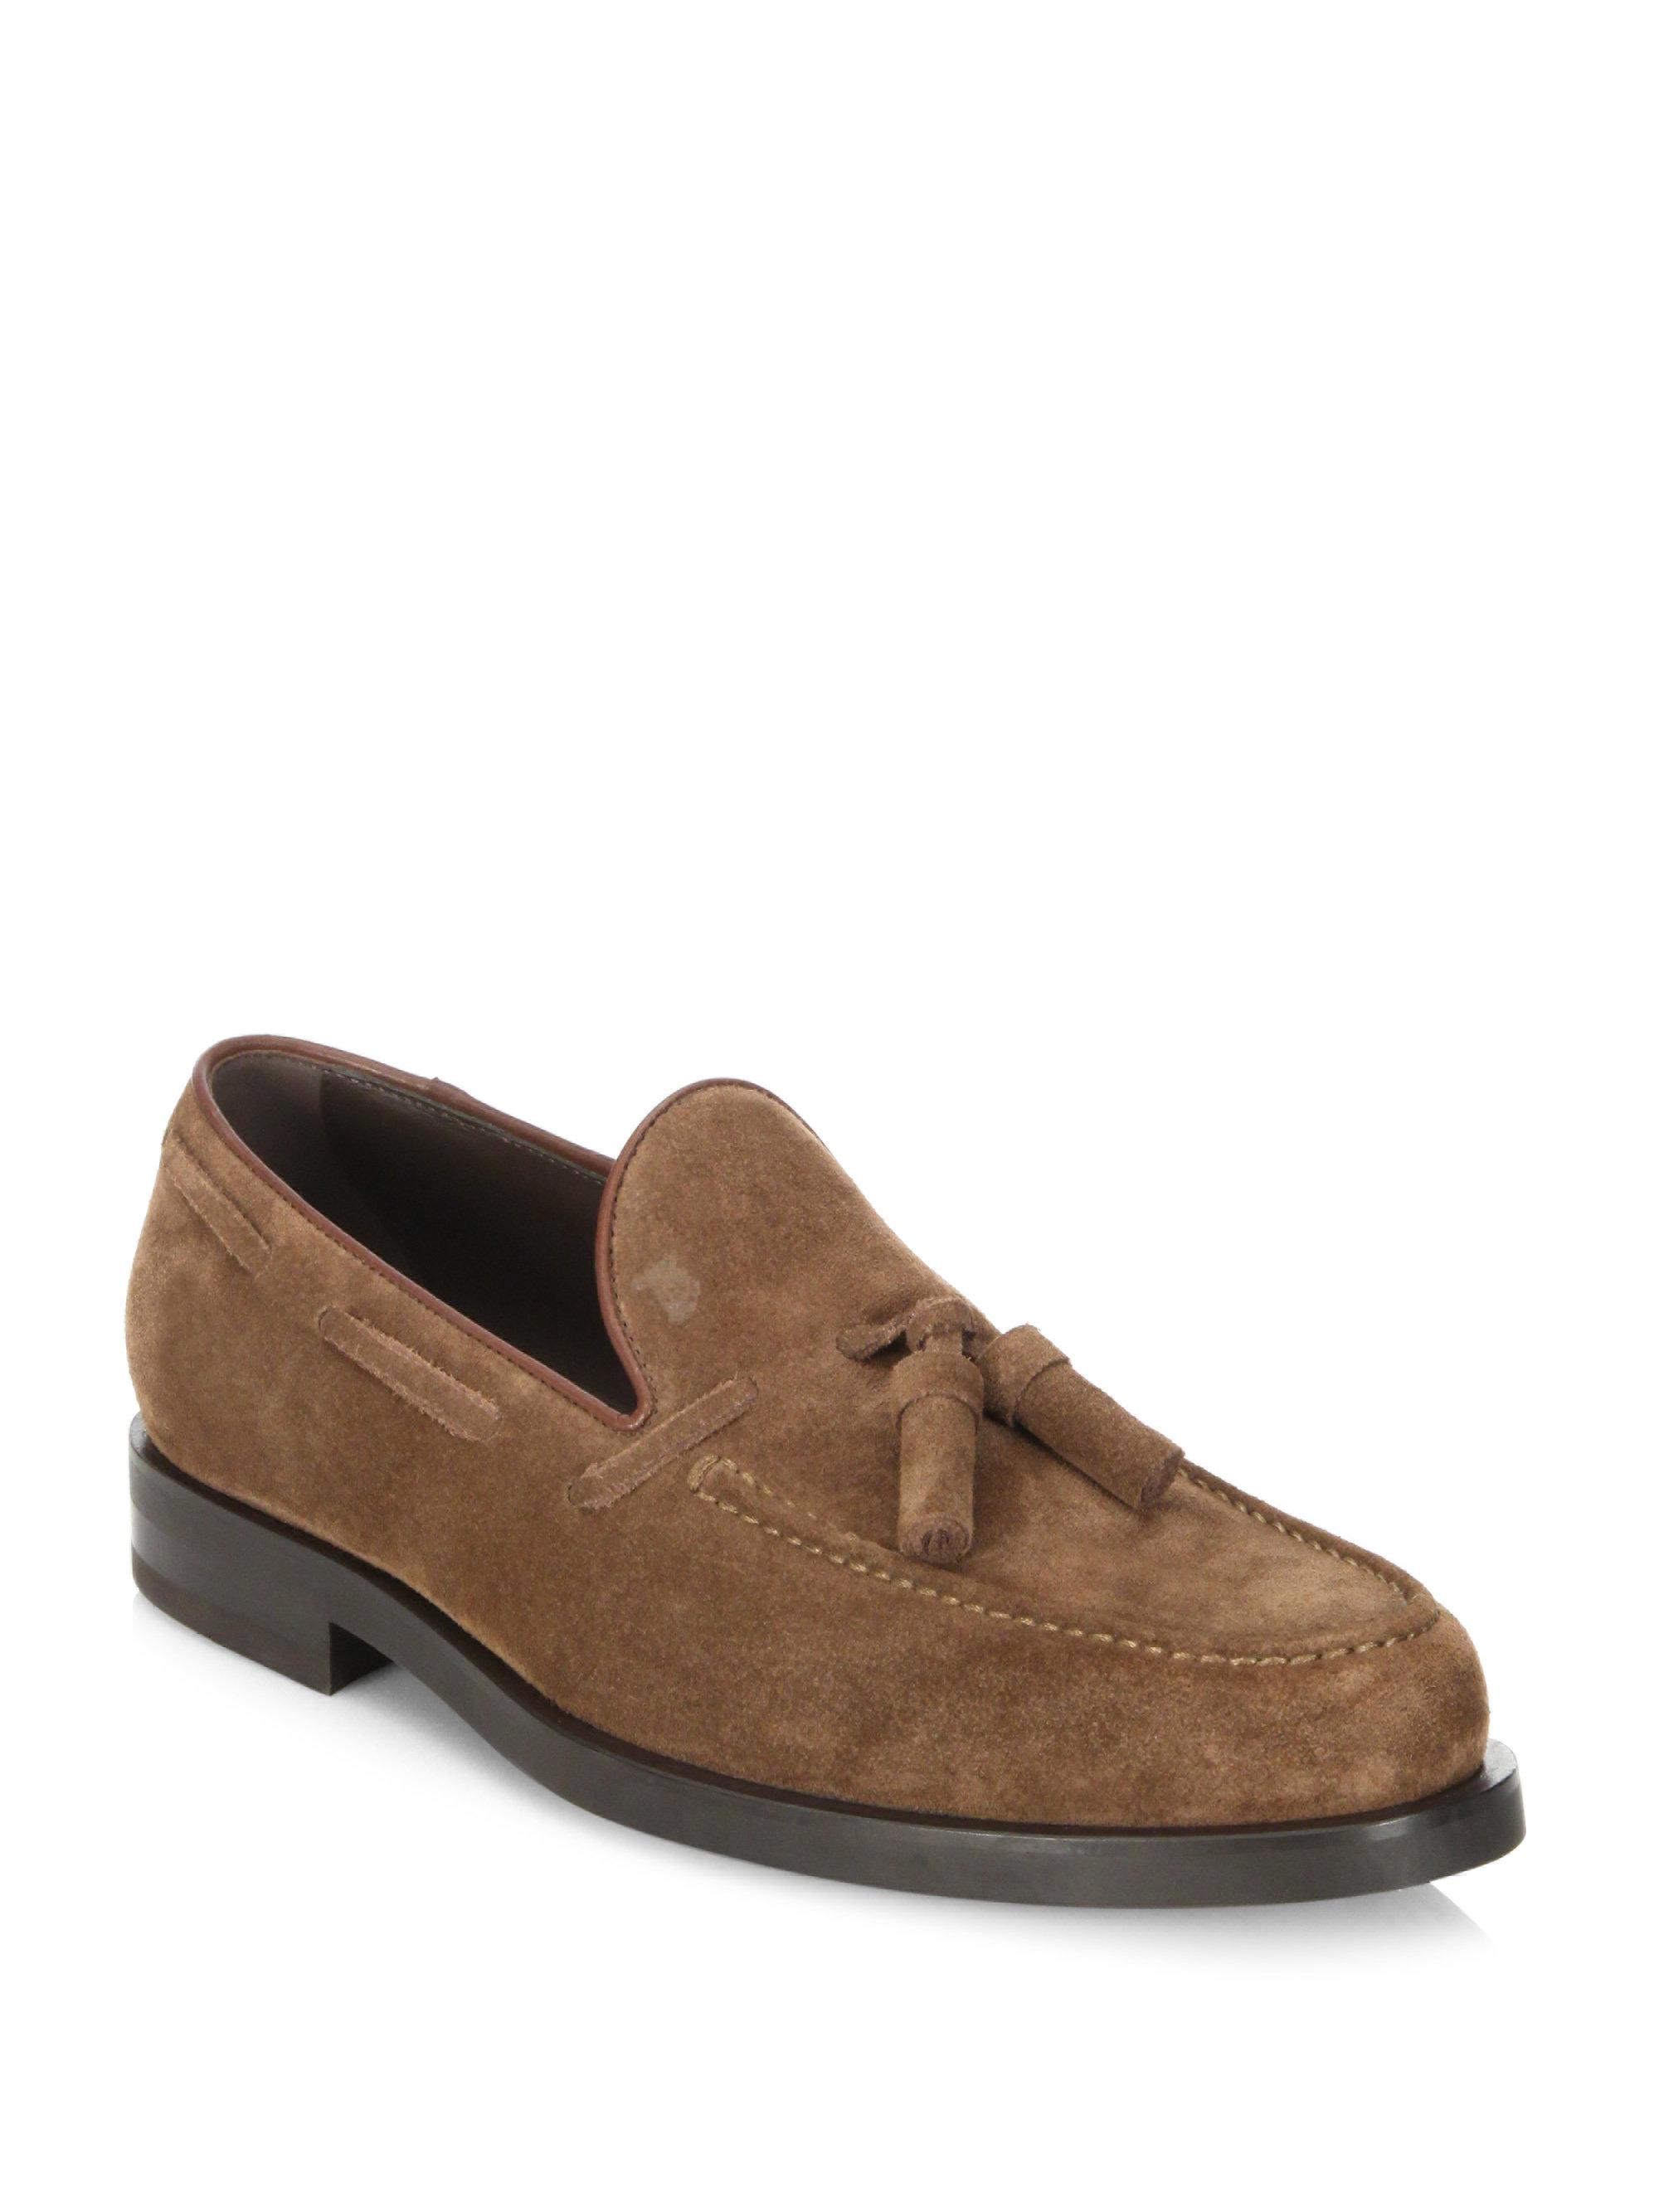 Lyst - Tod'S Tassel Suede Loafers in Brown for Men